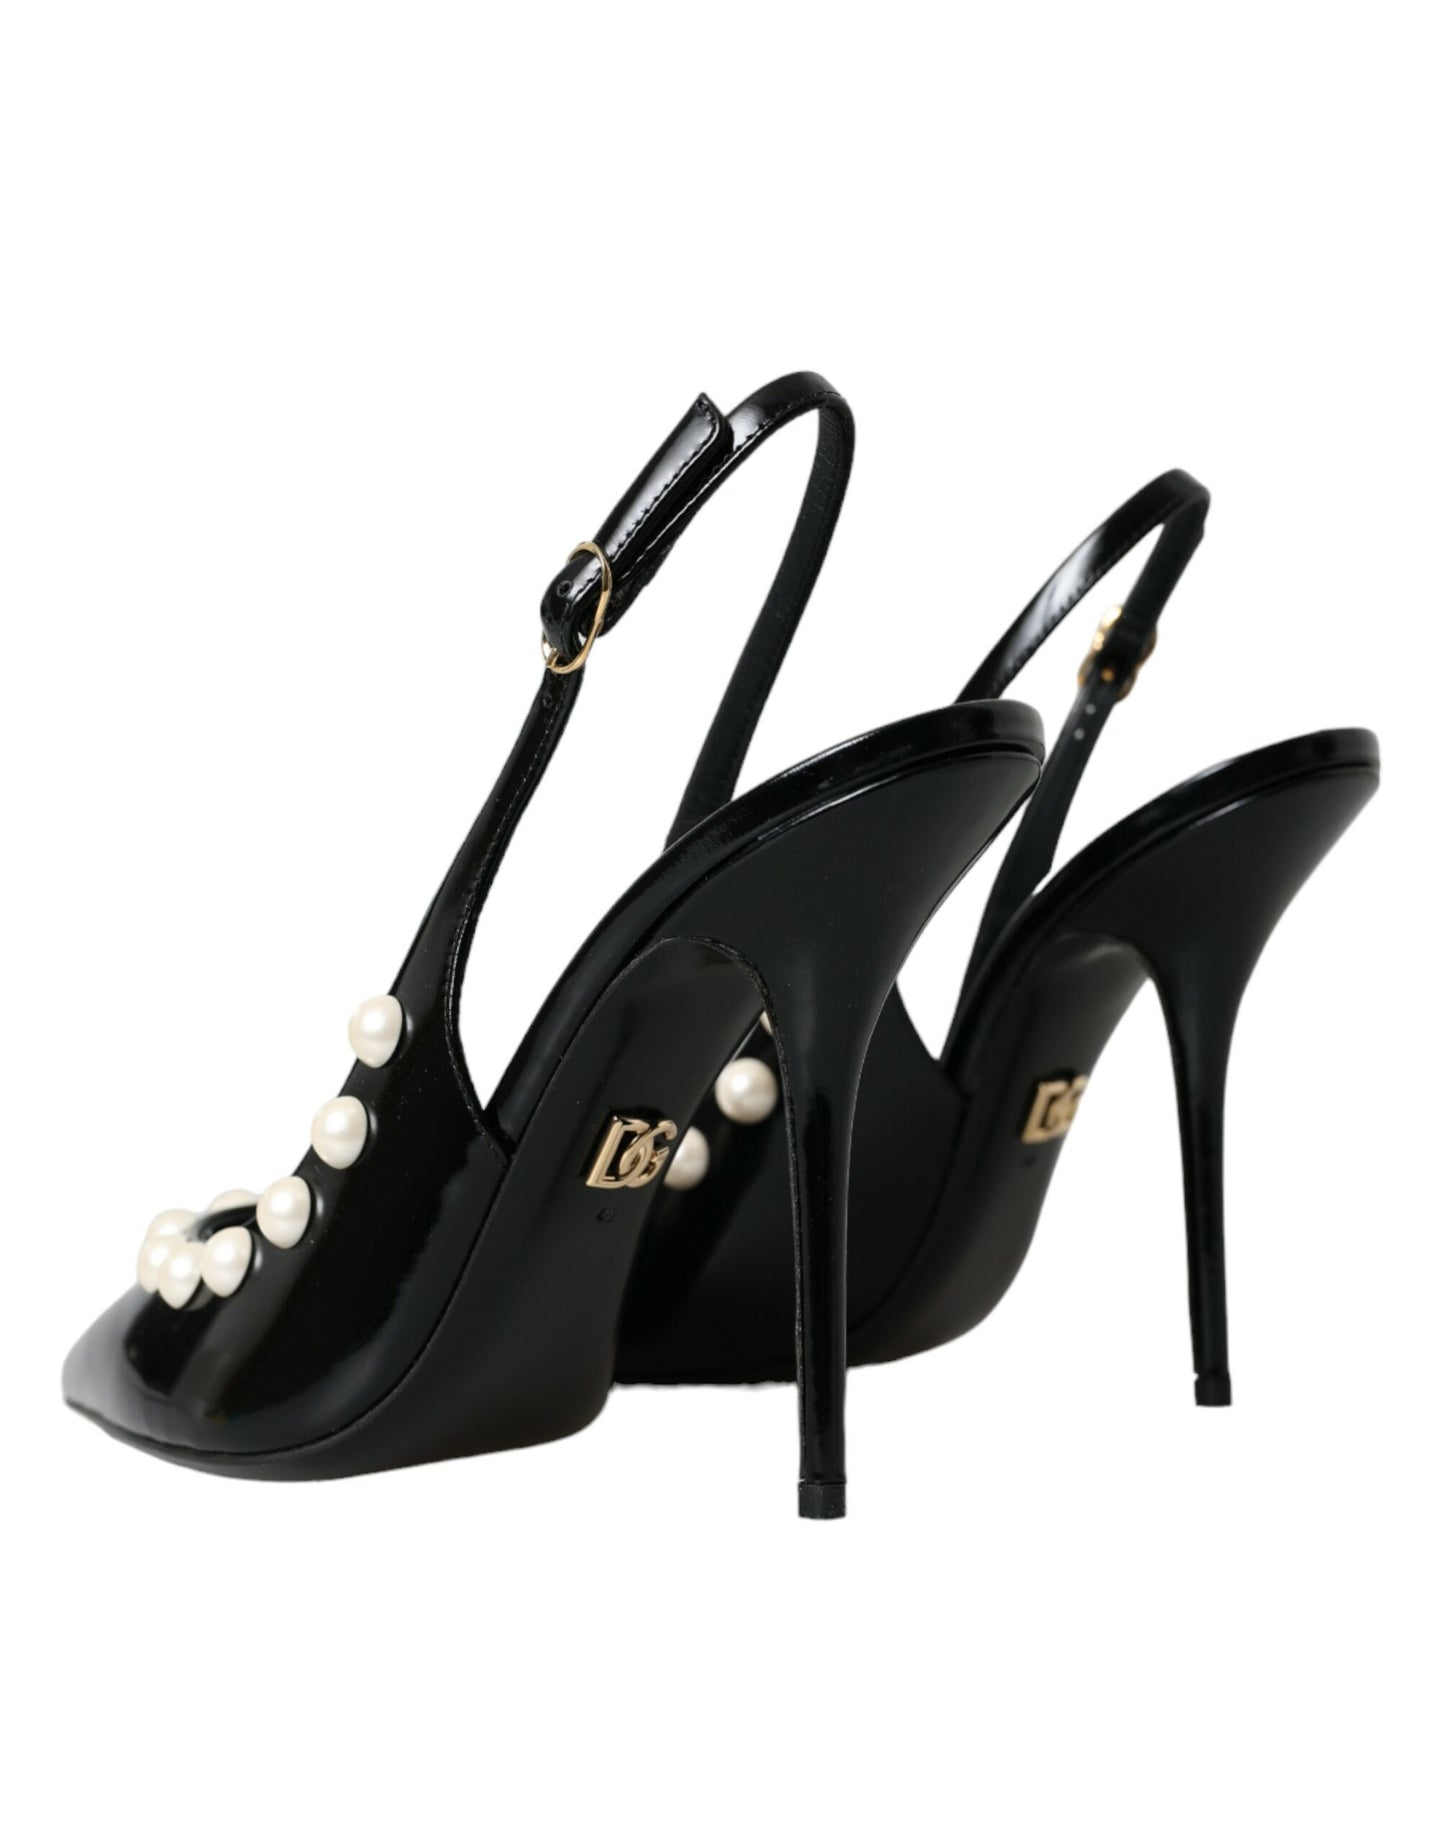 Black Leather Faux Pearl Heel Slingback Shoes